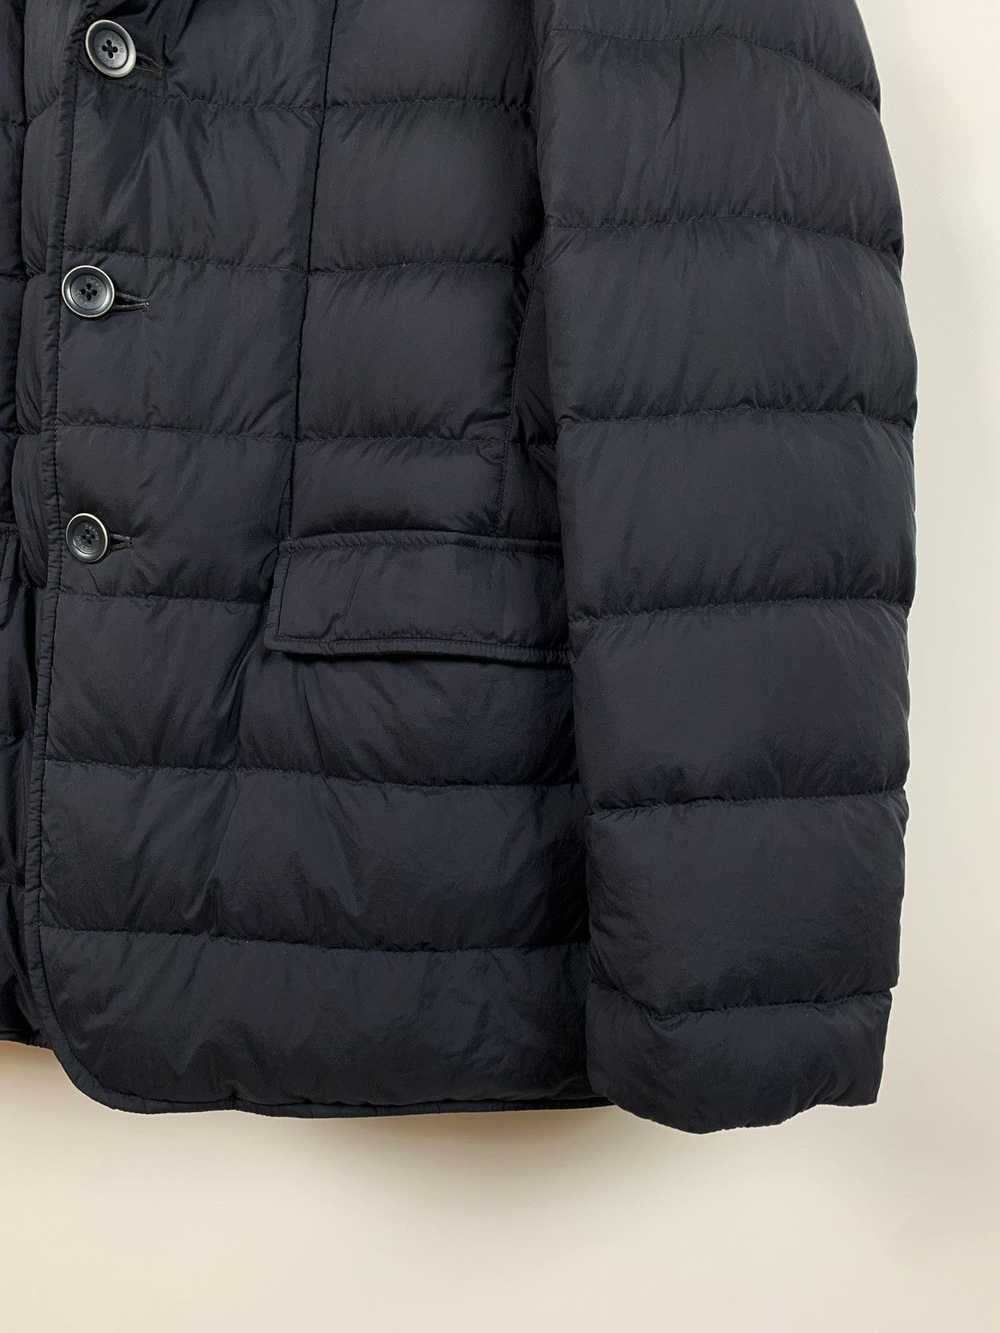 Herno Herno Navy Blue Quilted Down Jacket - image 10